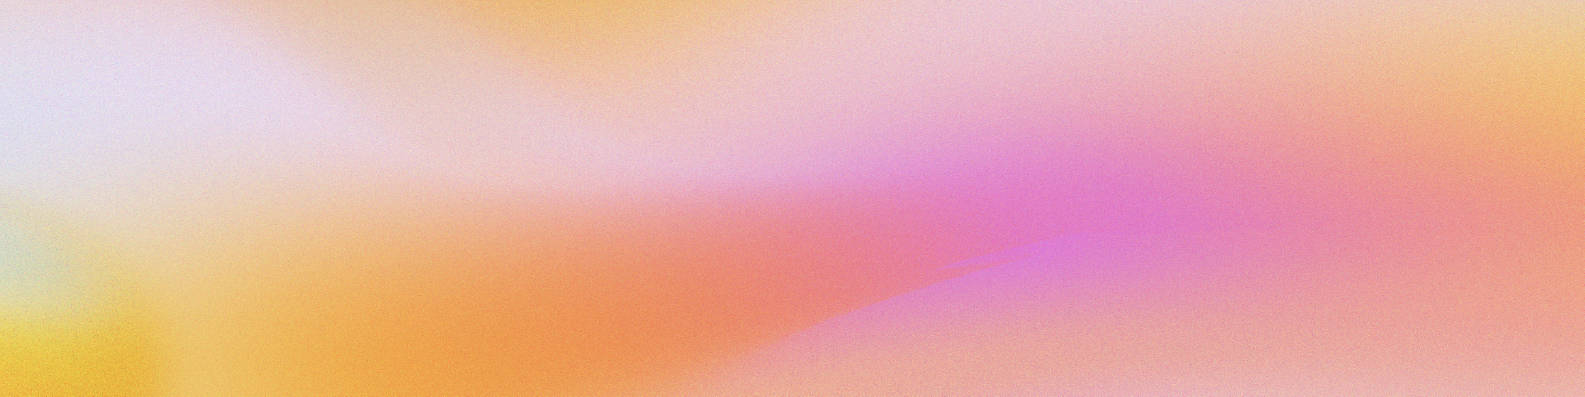 Abstract Pastel Linkedin Banner Picture